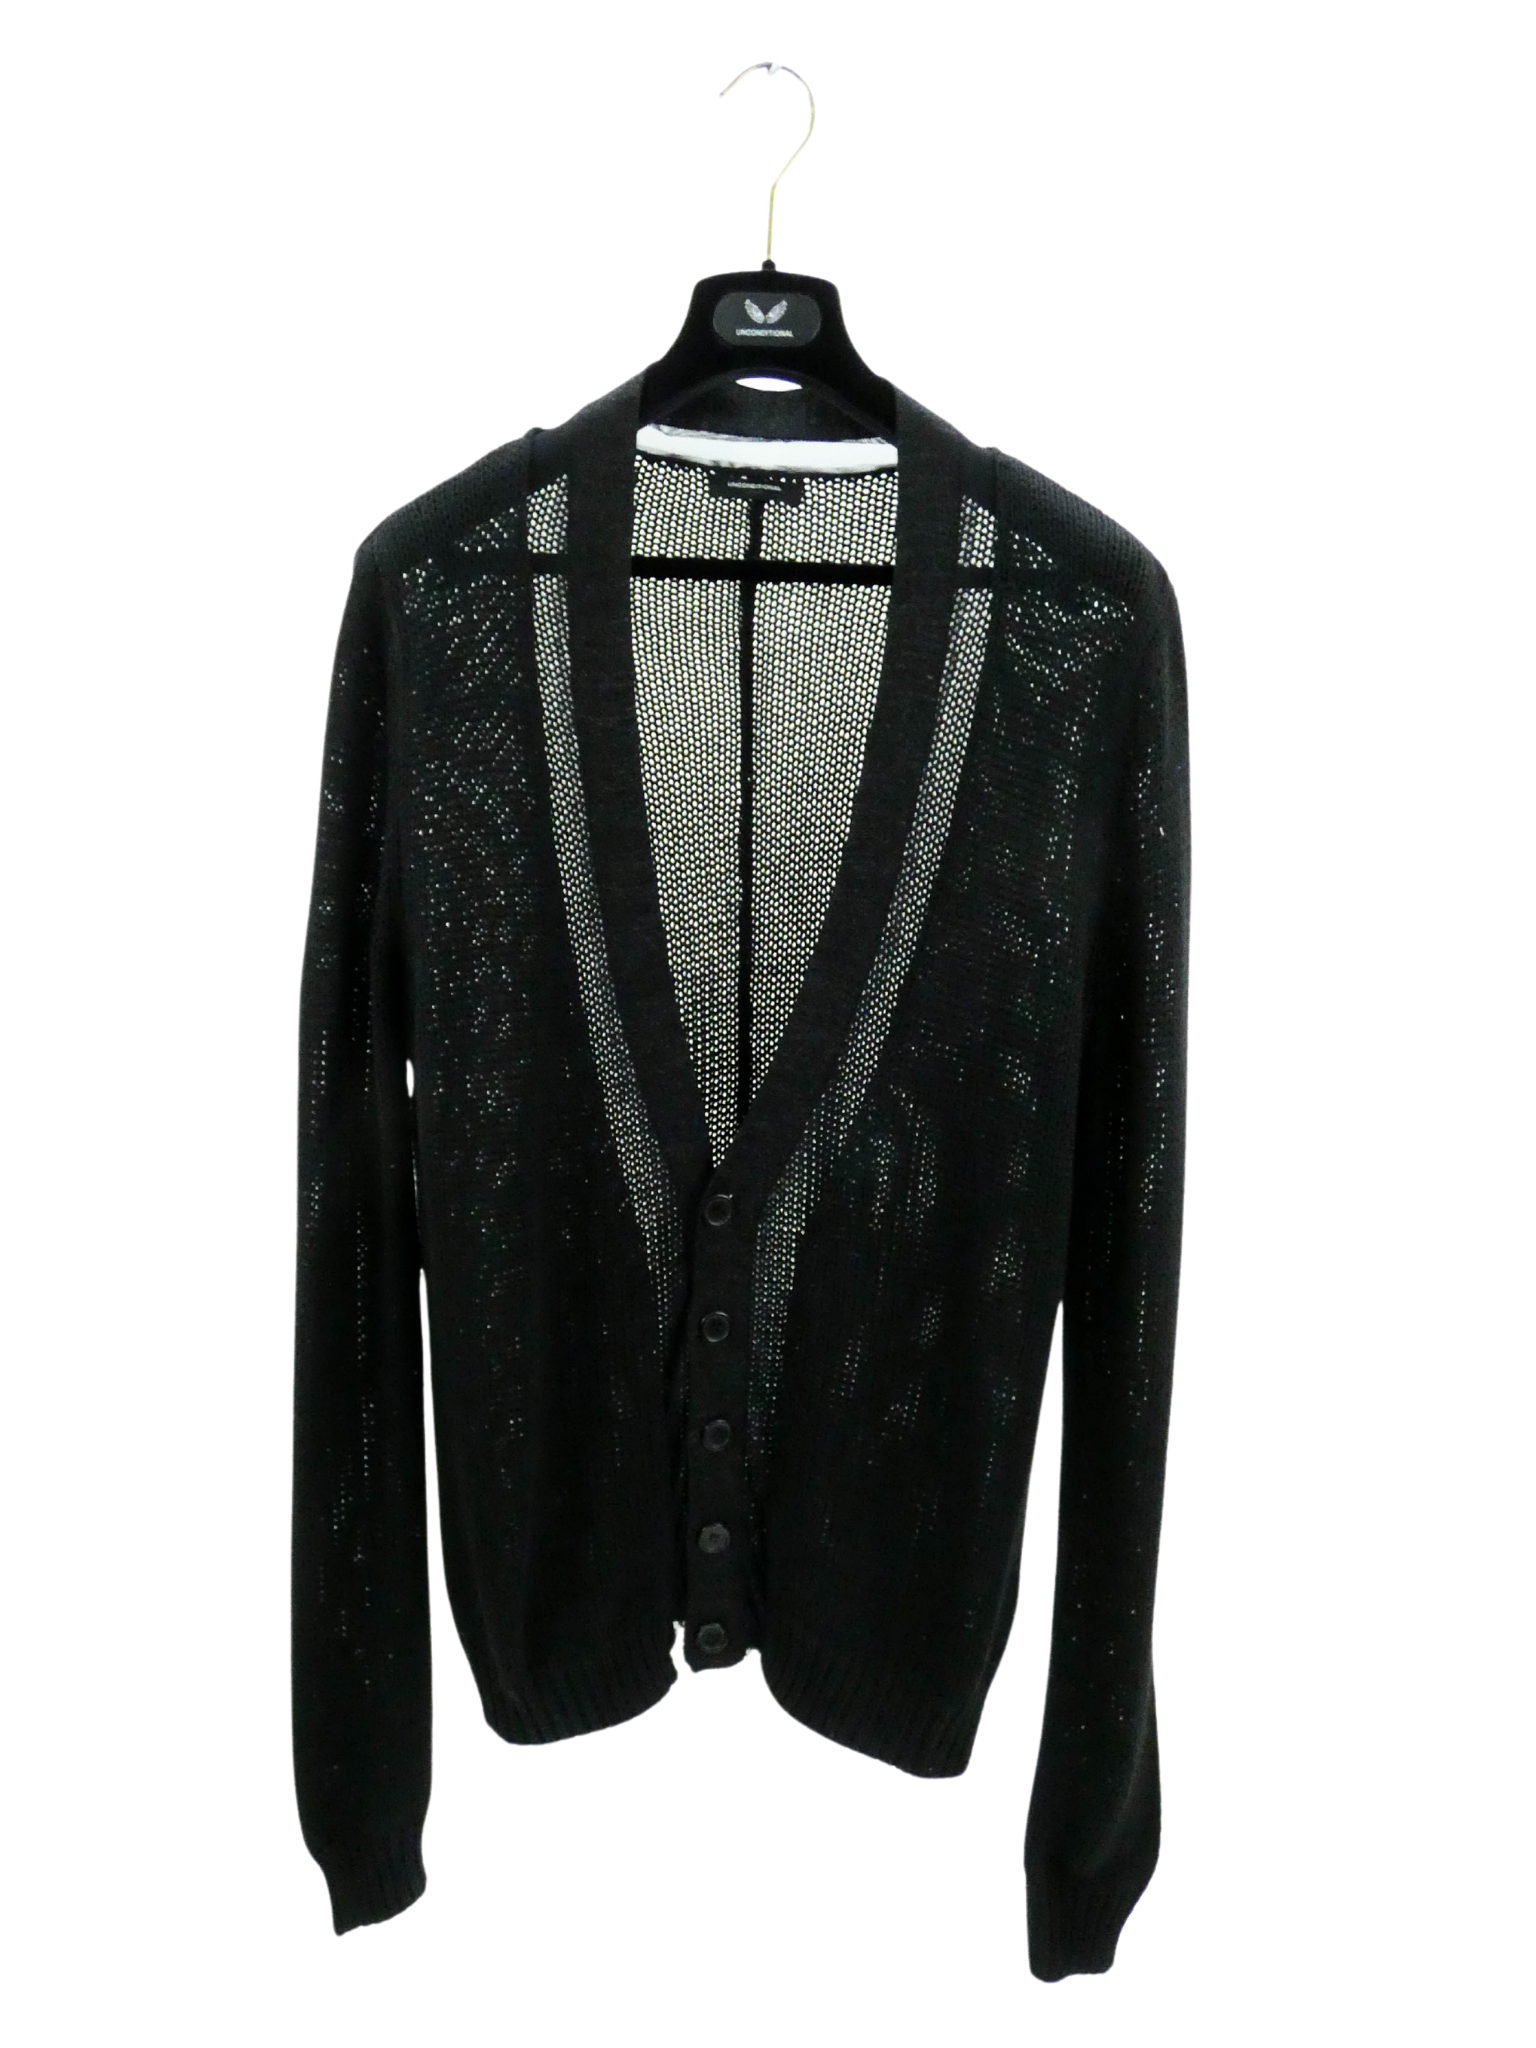 BLACK CHUNKY KNIT CARDIGAN WITH GLITTER AND MESH DETAIL